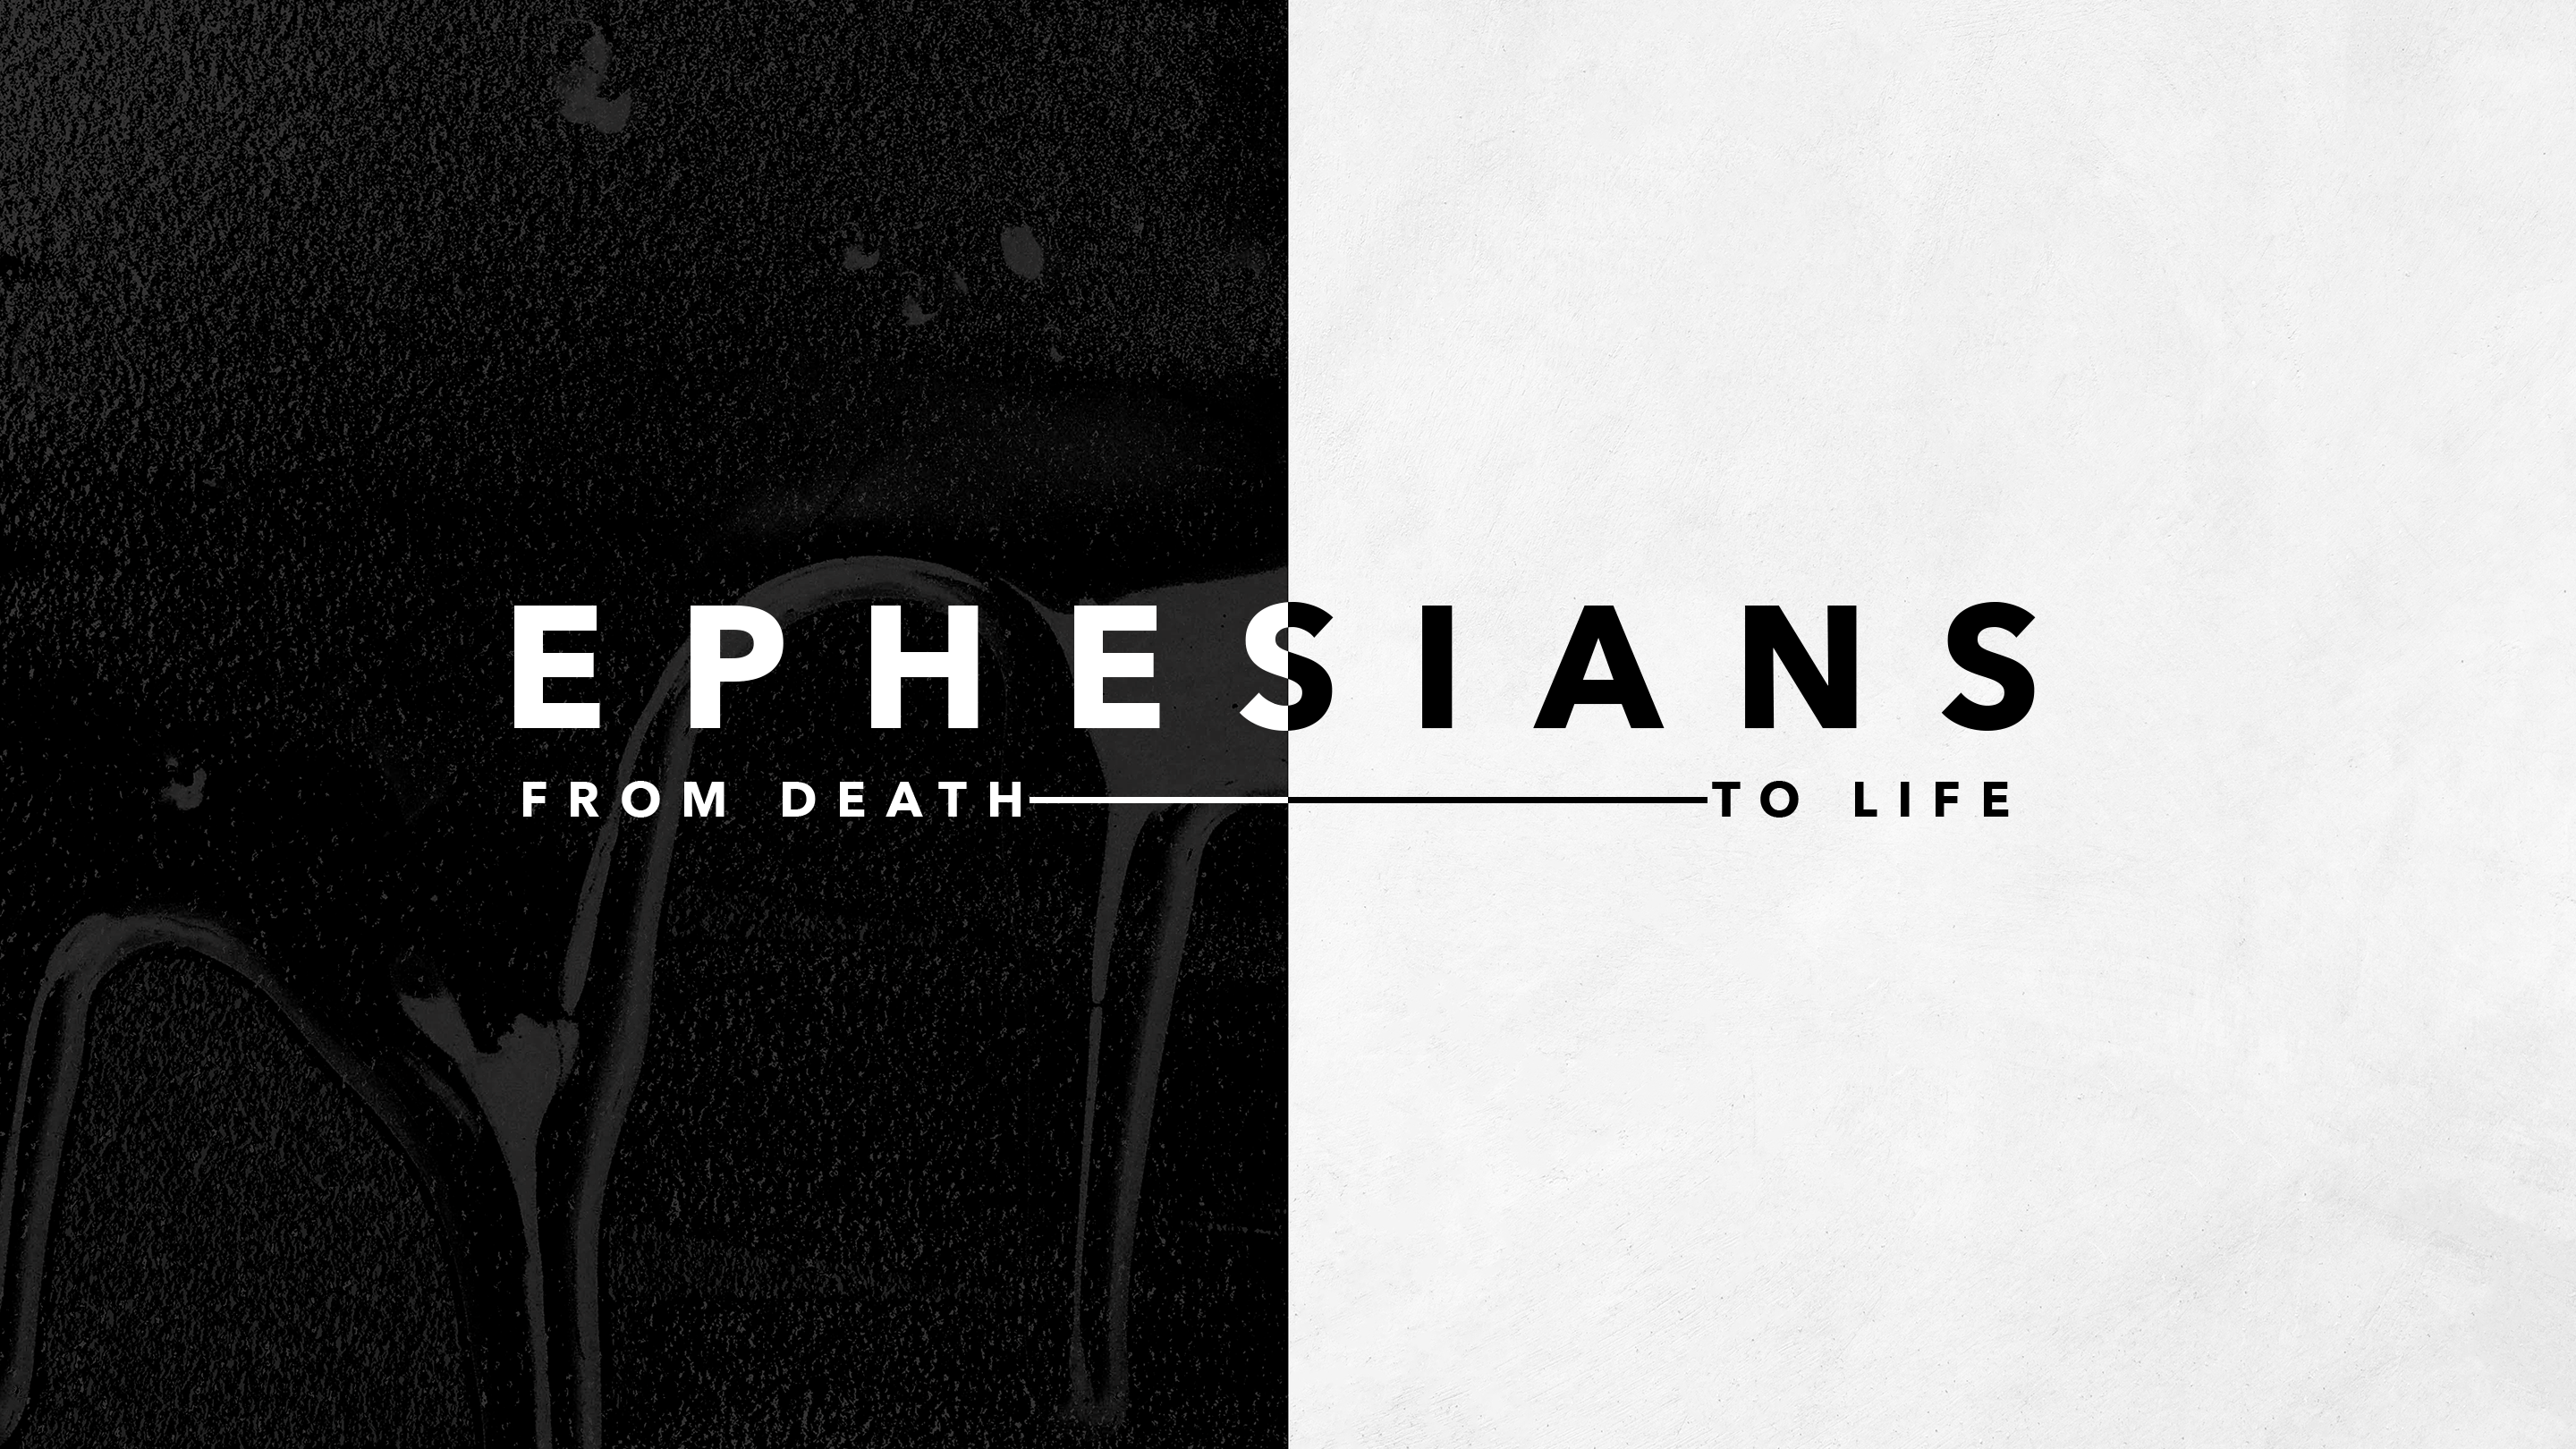 From Life to Death: Walk In Grace (Ephesians 4:1-16) 